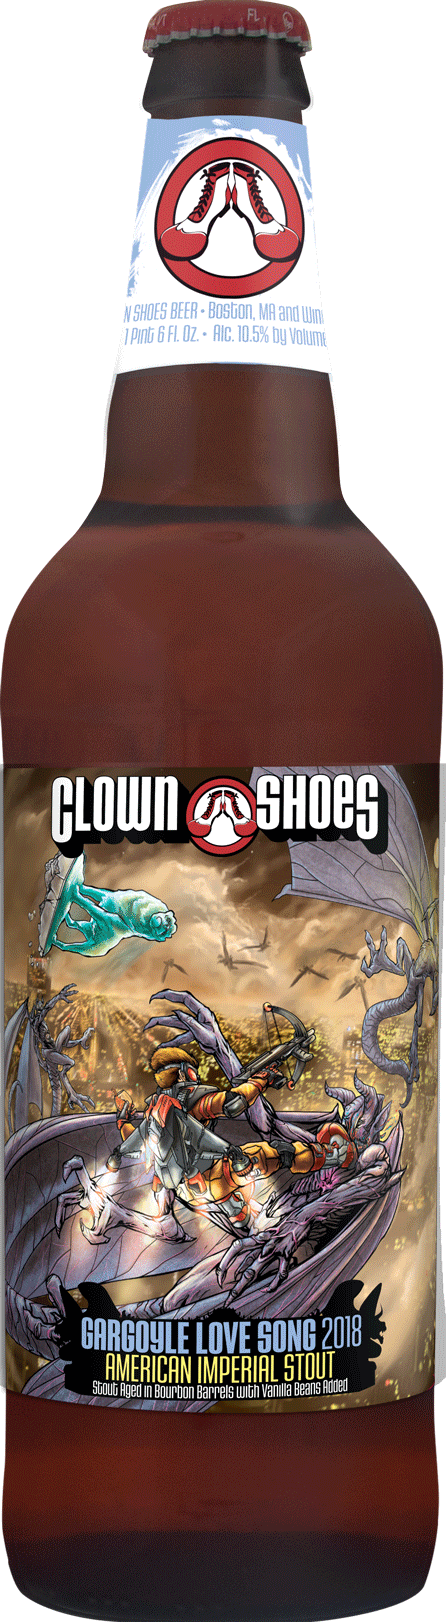 Treehouse etc   micro craft beer can Singlecut Clown Shoes,Spencer Pumpkin